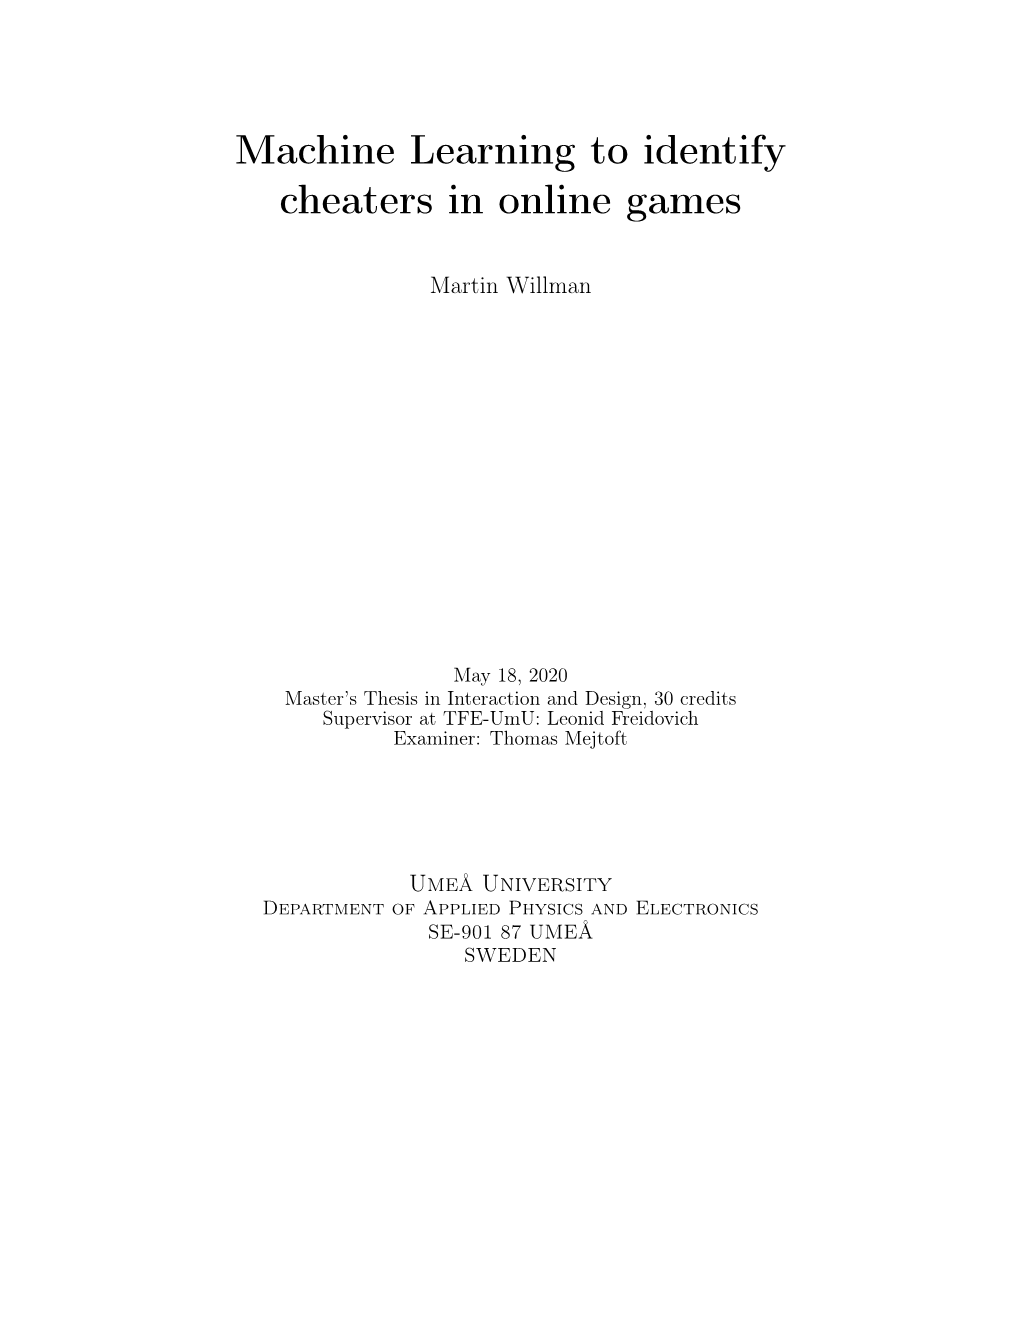 Machine Learning to Identify Cheaters in Online Games